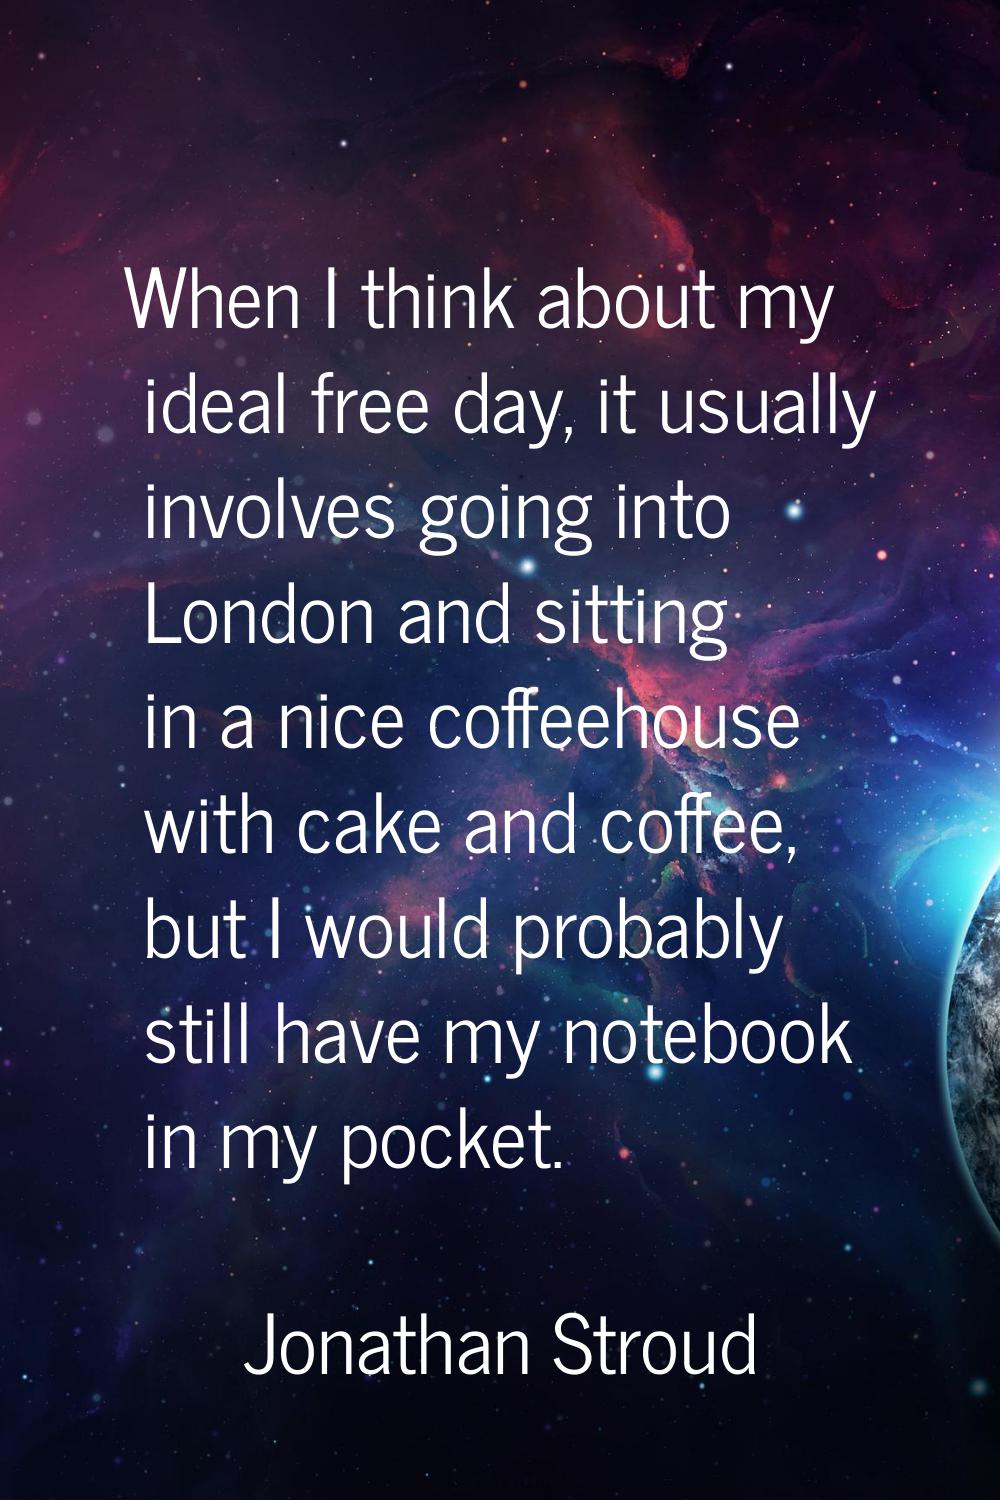 When I think about my ideal free day, it usually involves going into London and sitting in a nice c